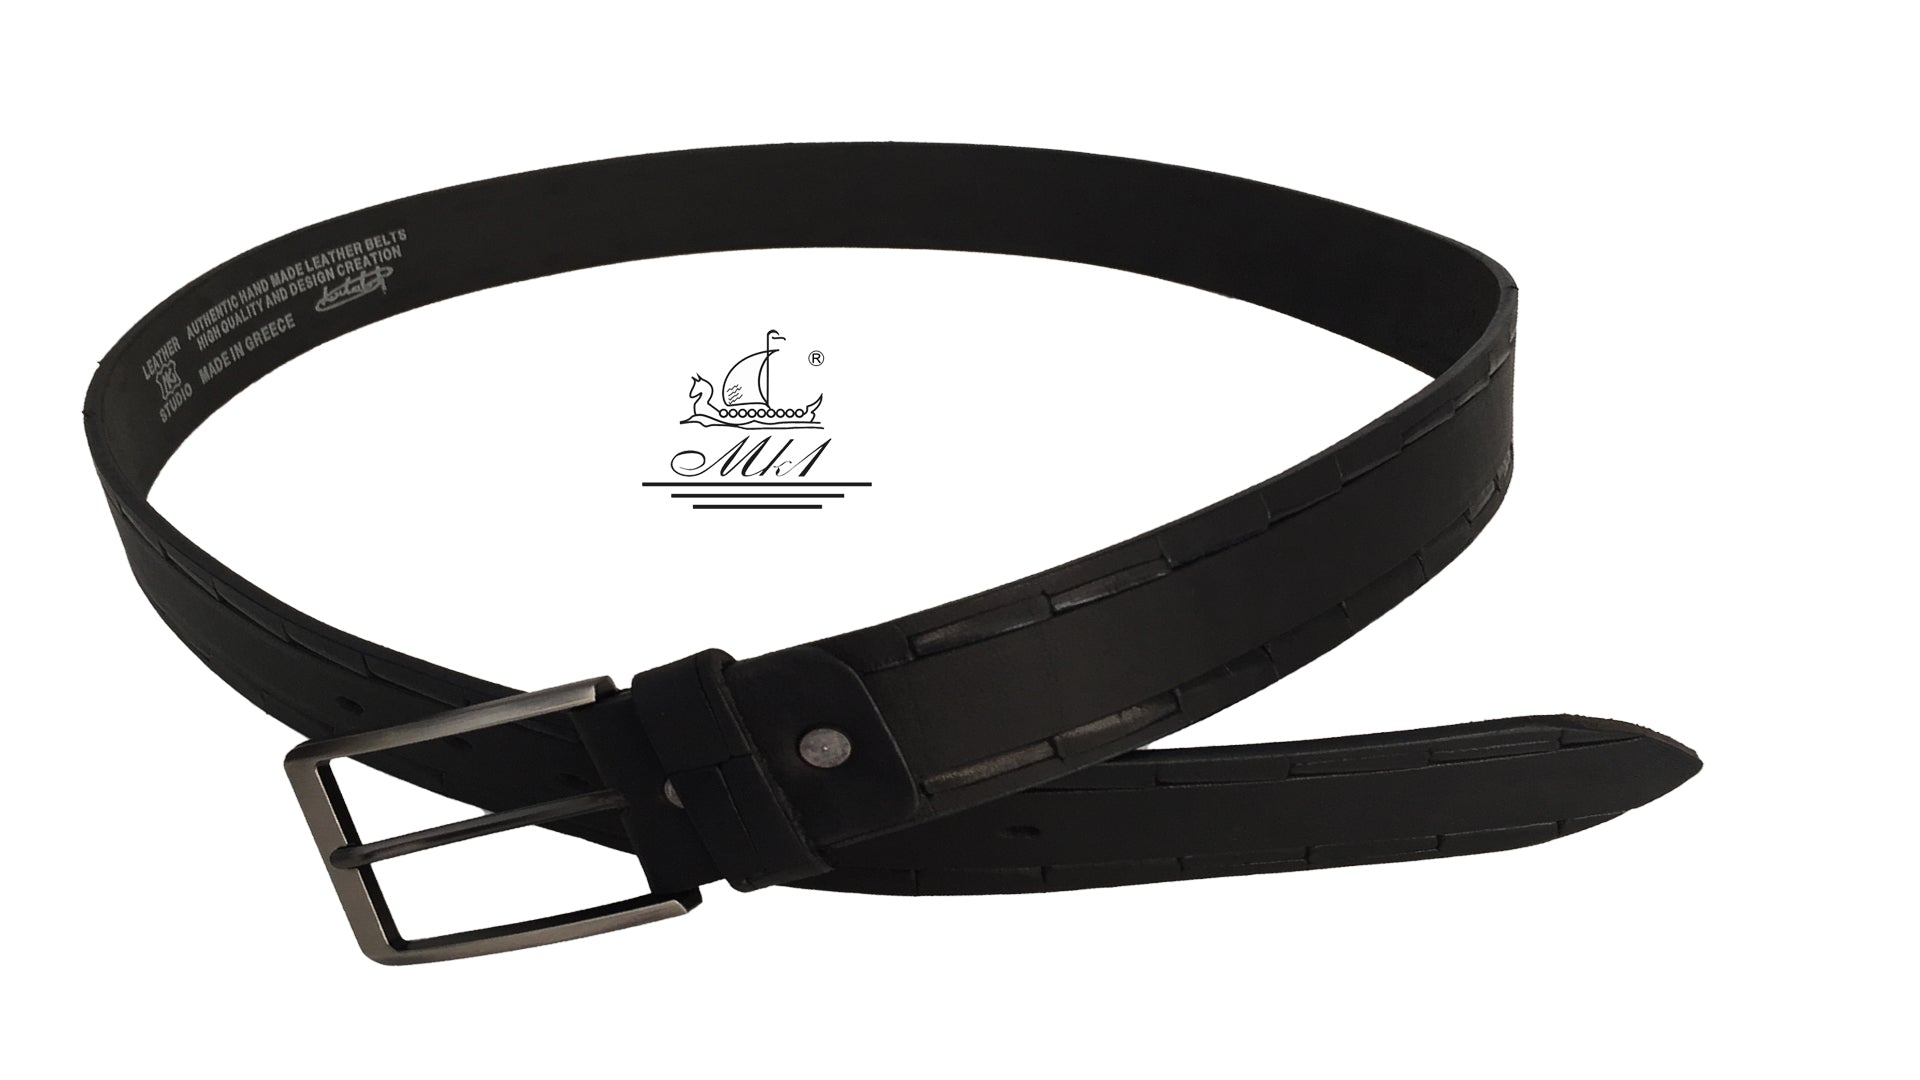 Z2752/40m-krp Hand made leather belt